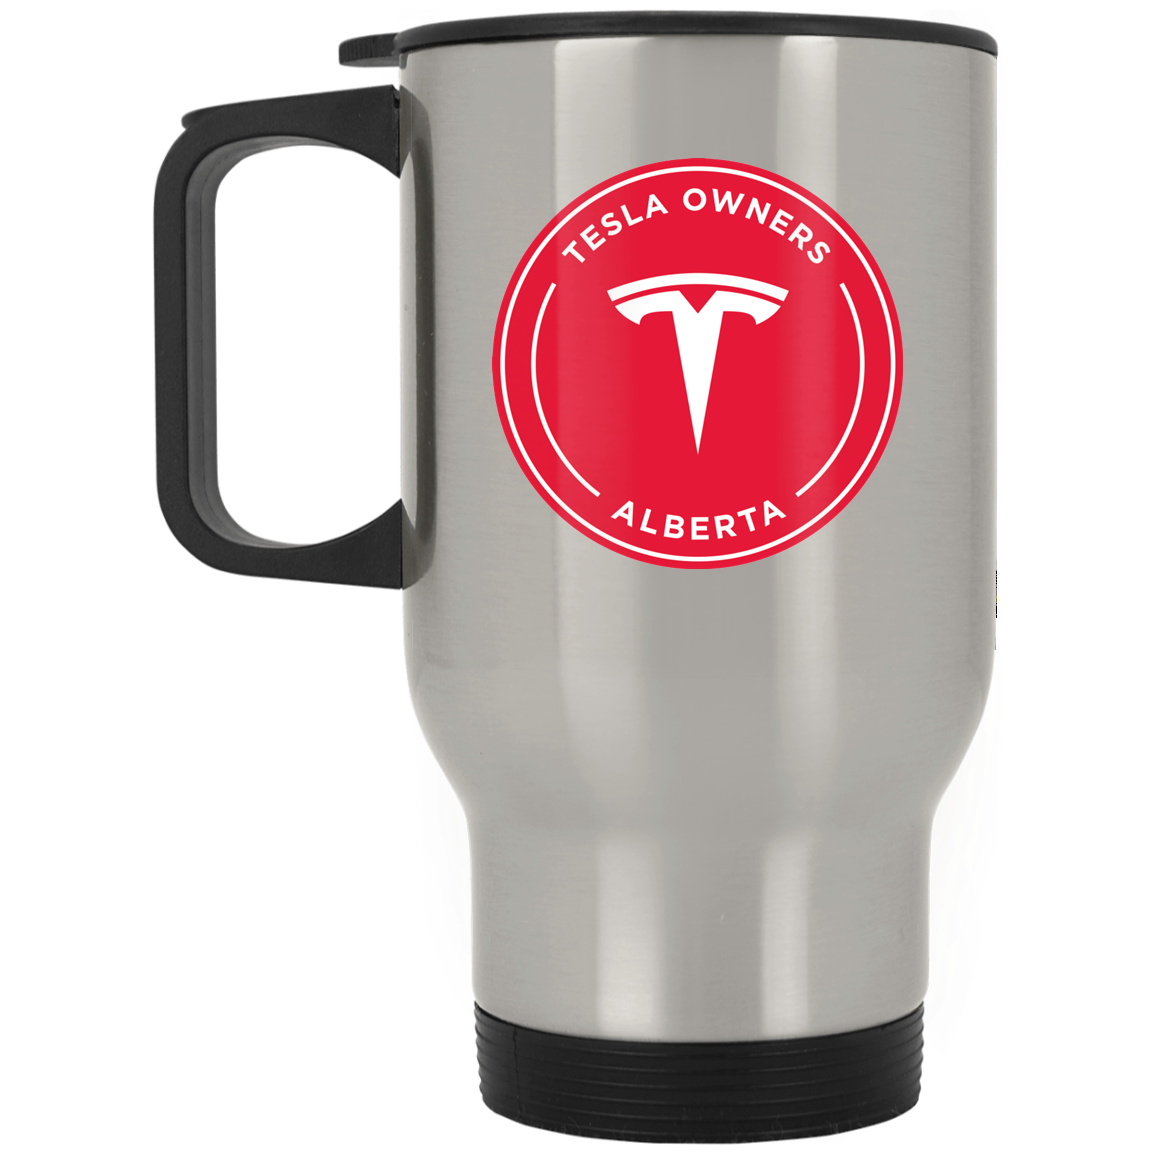 Tesla Owners Club of Alberta XP8400S Silver Stainless Travel Mug